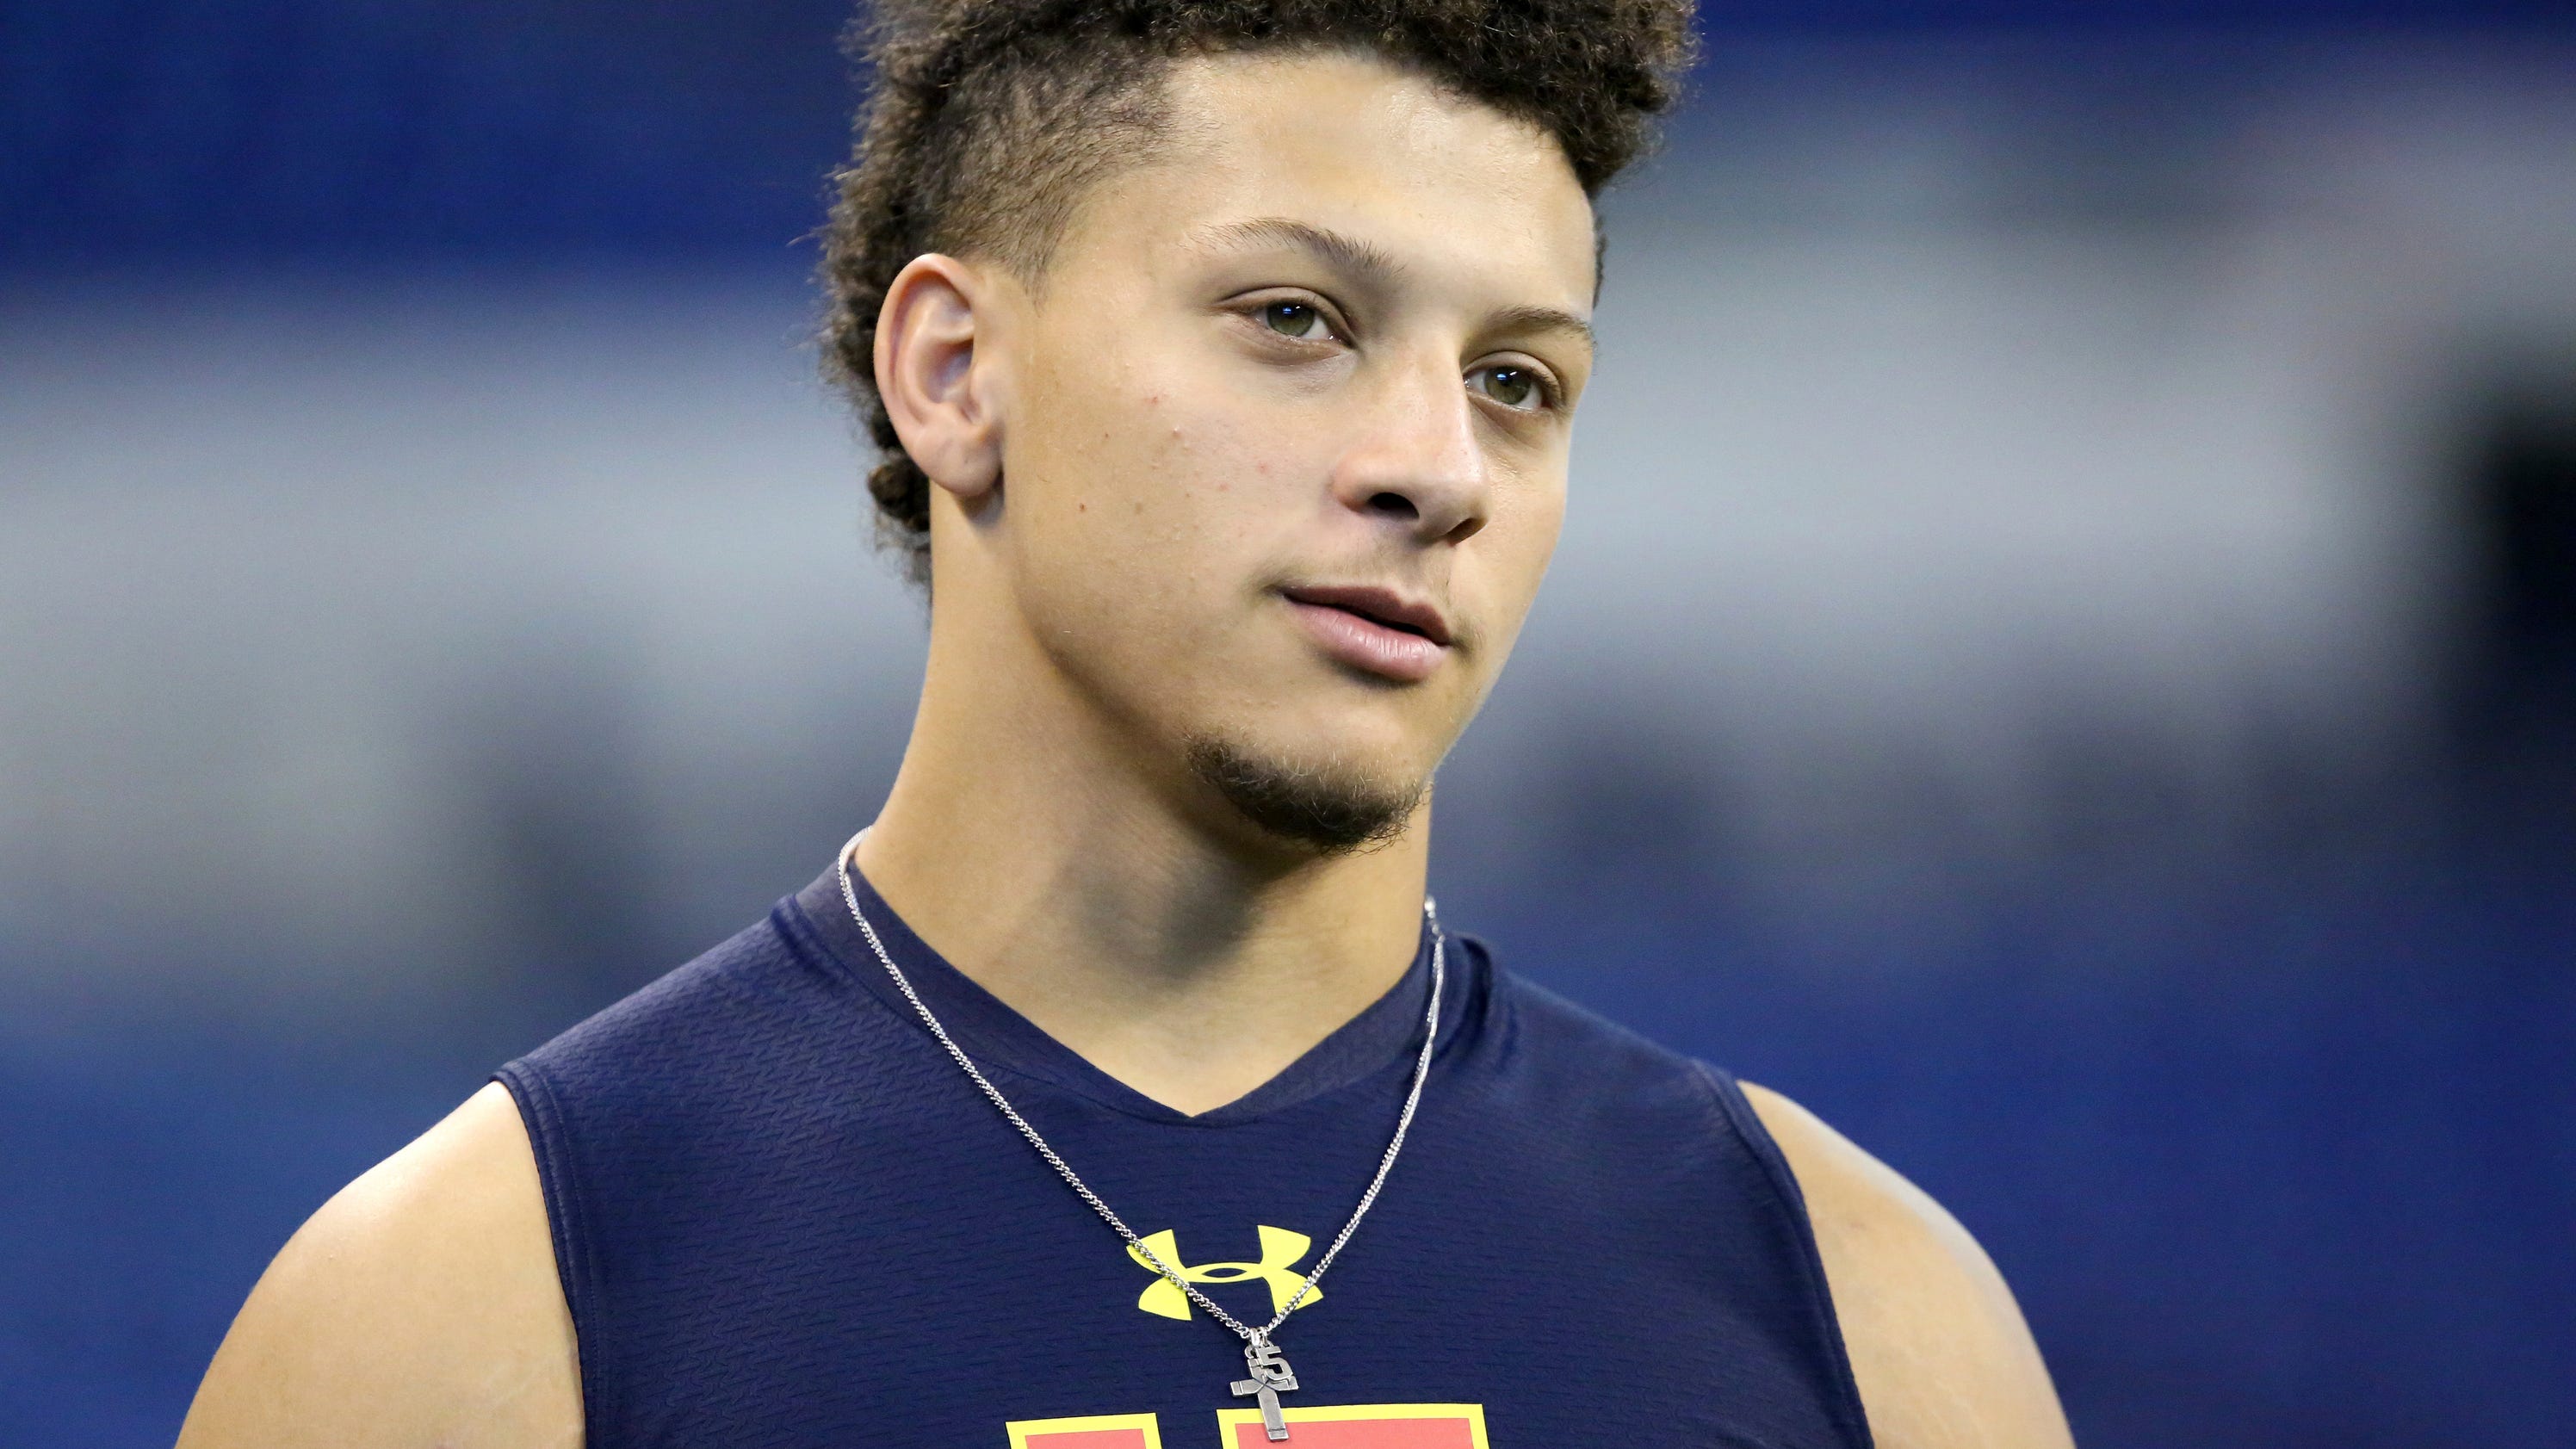 Sheriff: Chiefs top draft pick Mahomes unharmed in robbery